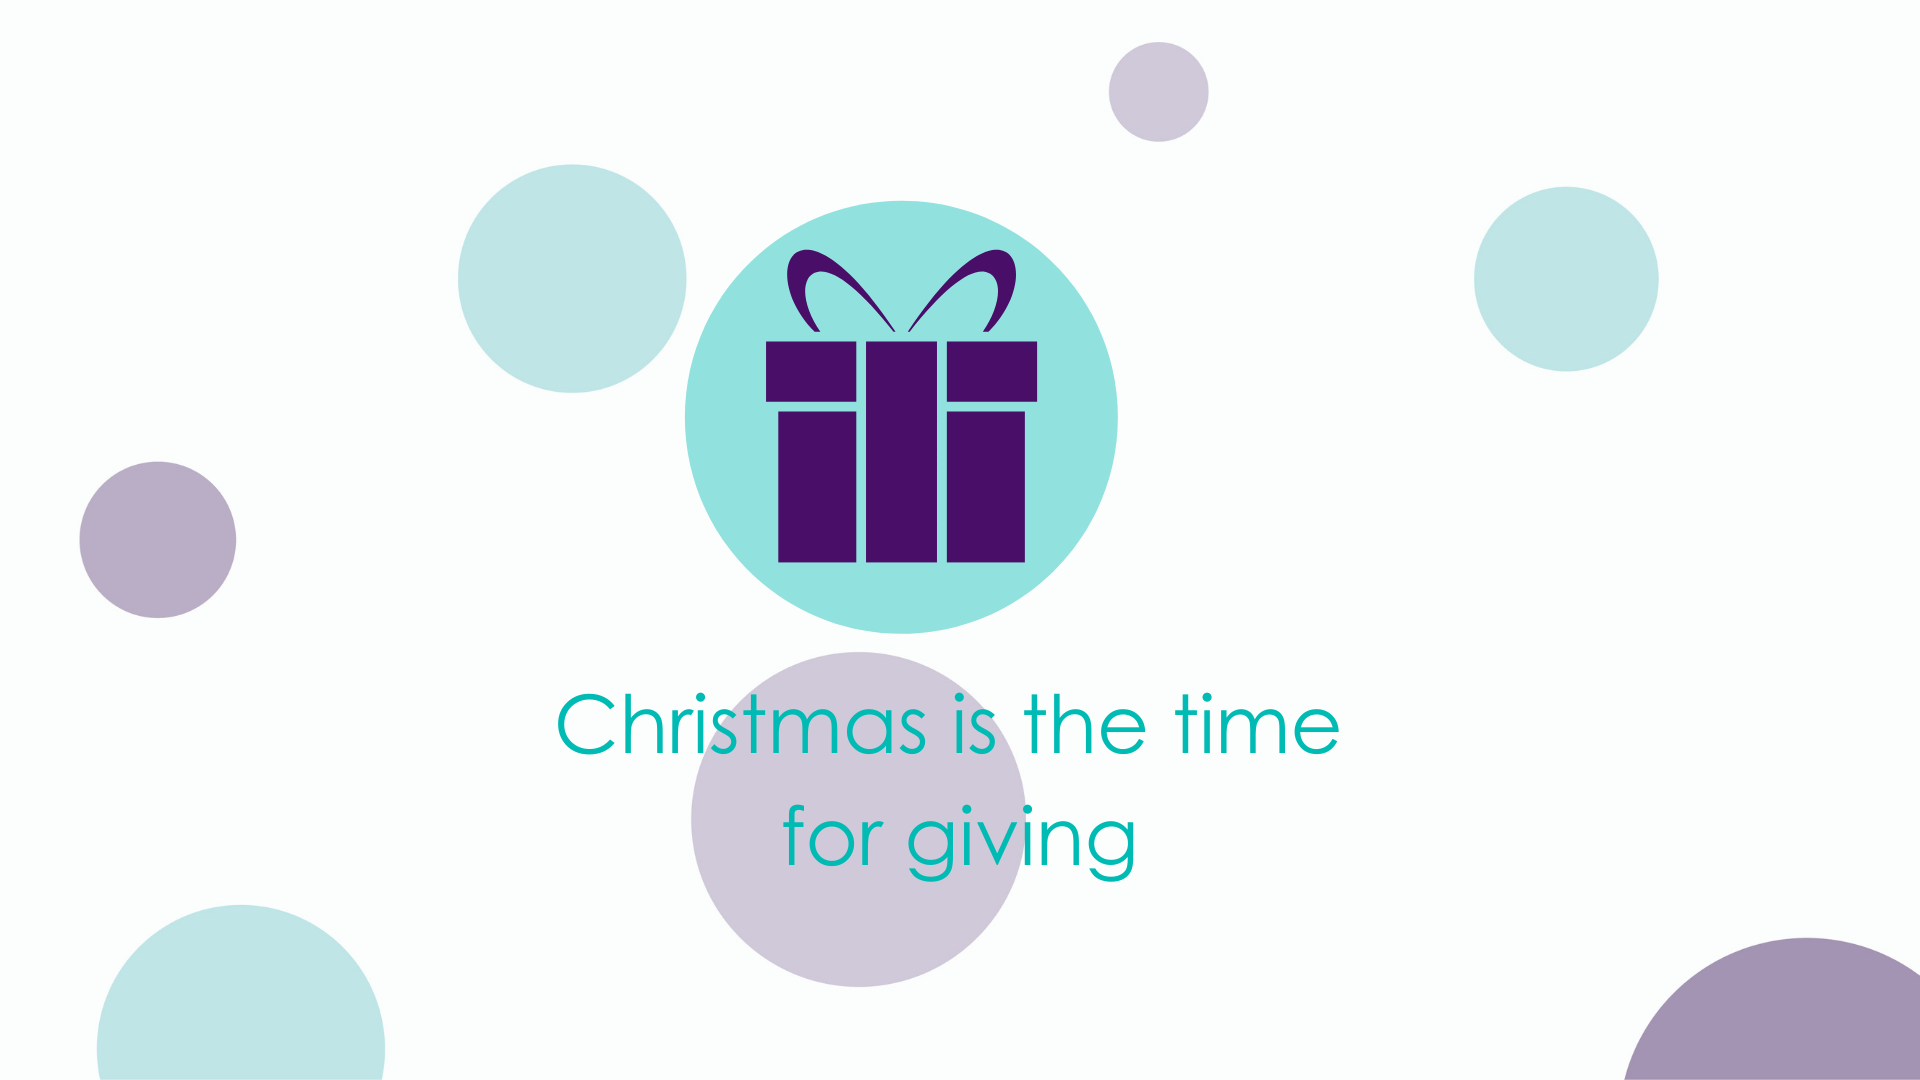 Christmas is the time for giving